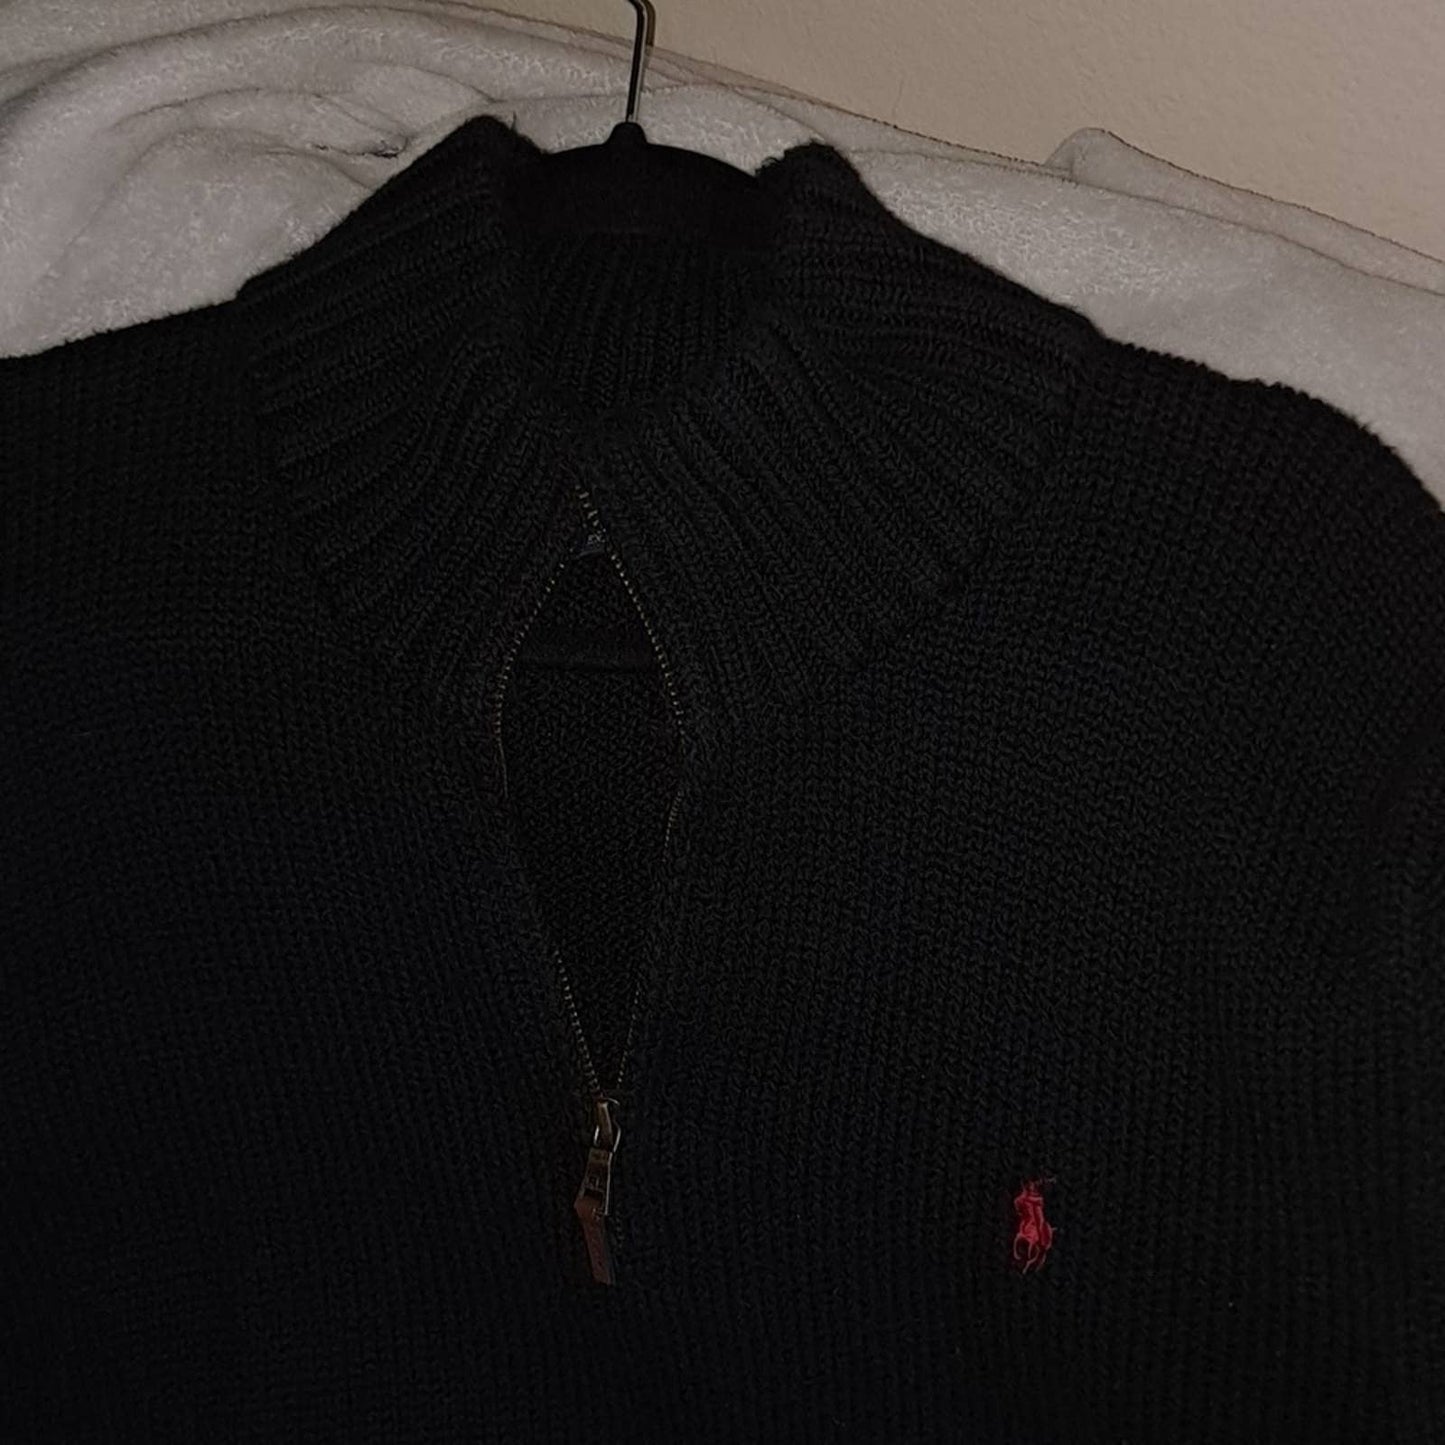 Ralph Lauren polo performance pullover sweater XXL with leather zipper hold